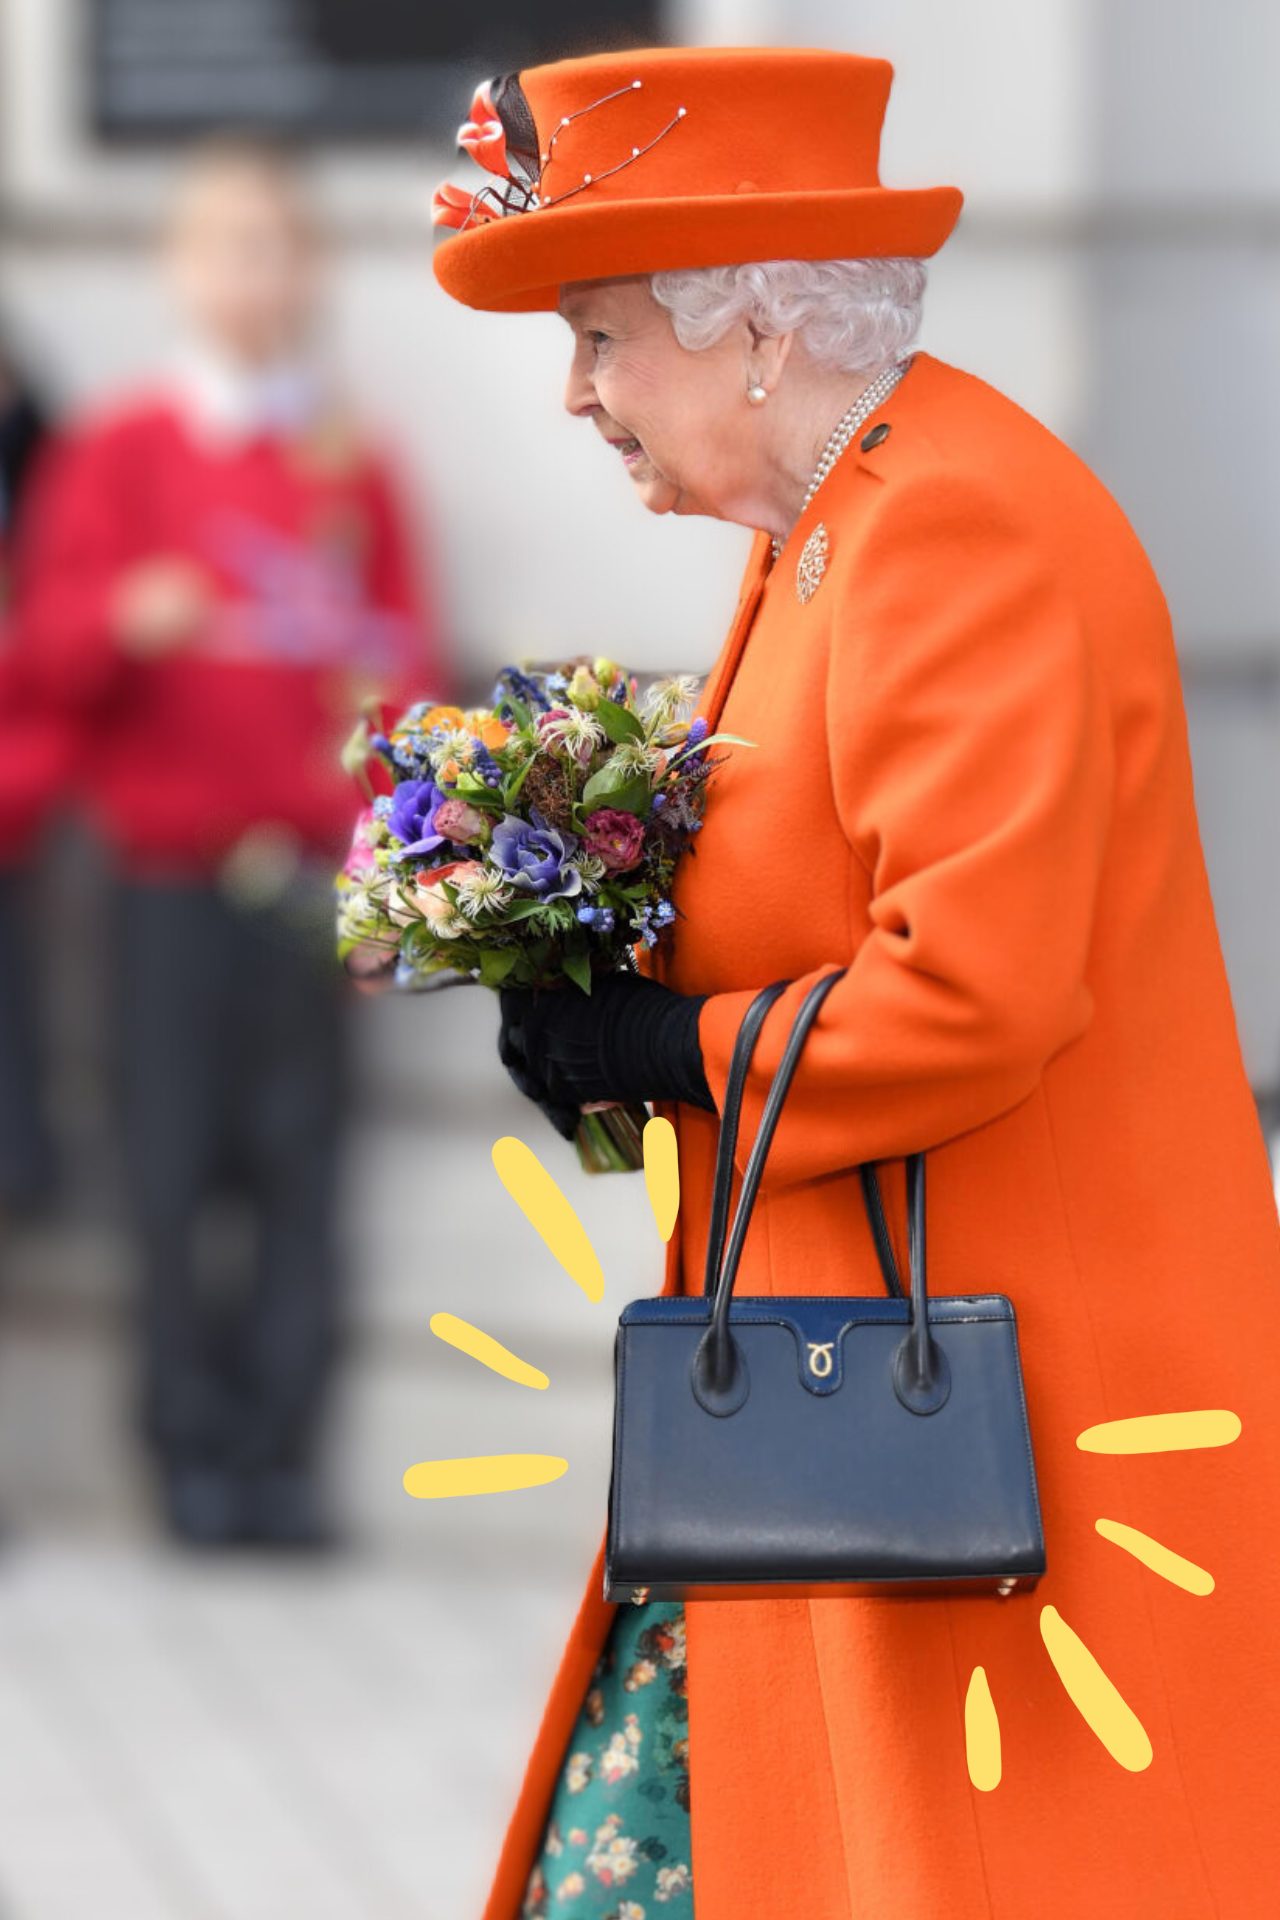 A photograph of Queen Elizabeth II, dressed in a red coat and a red hat. She is holding a bouquet and has a black handbag hanging off her arm.